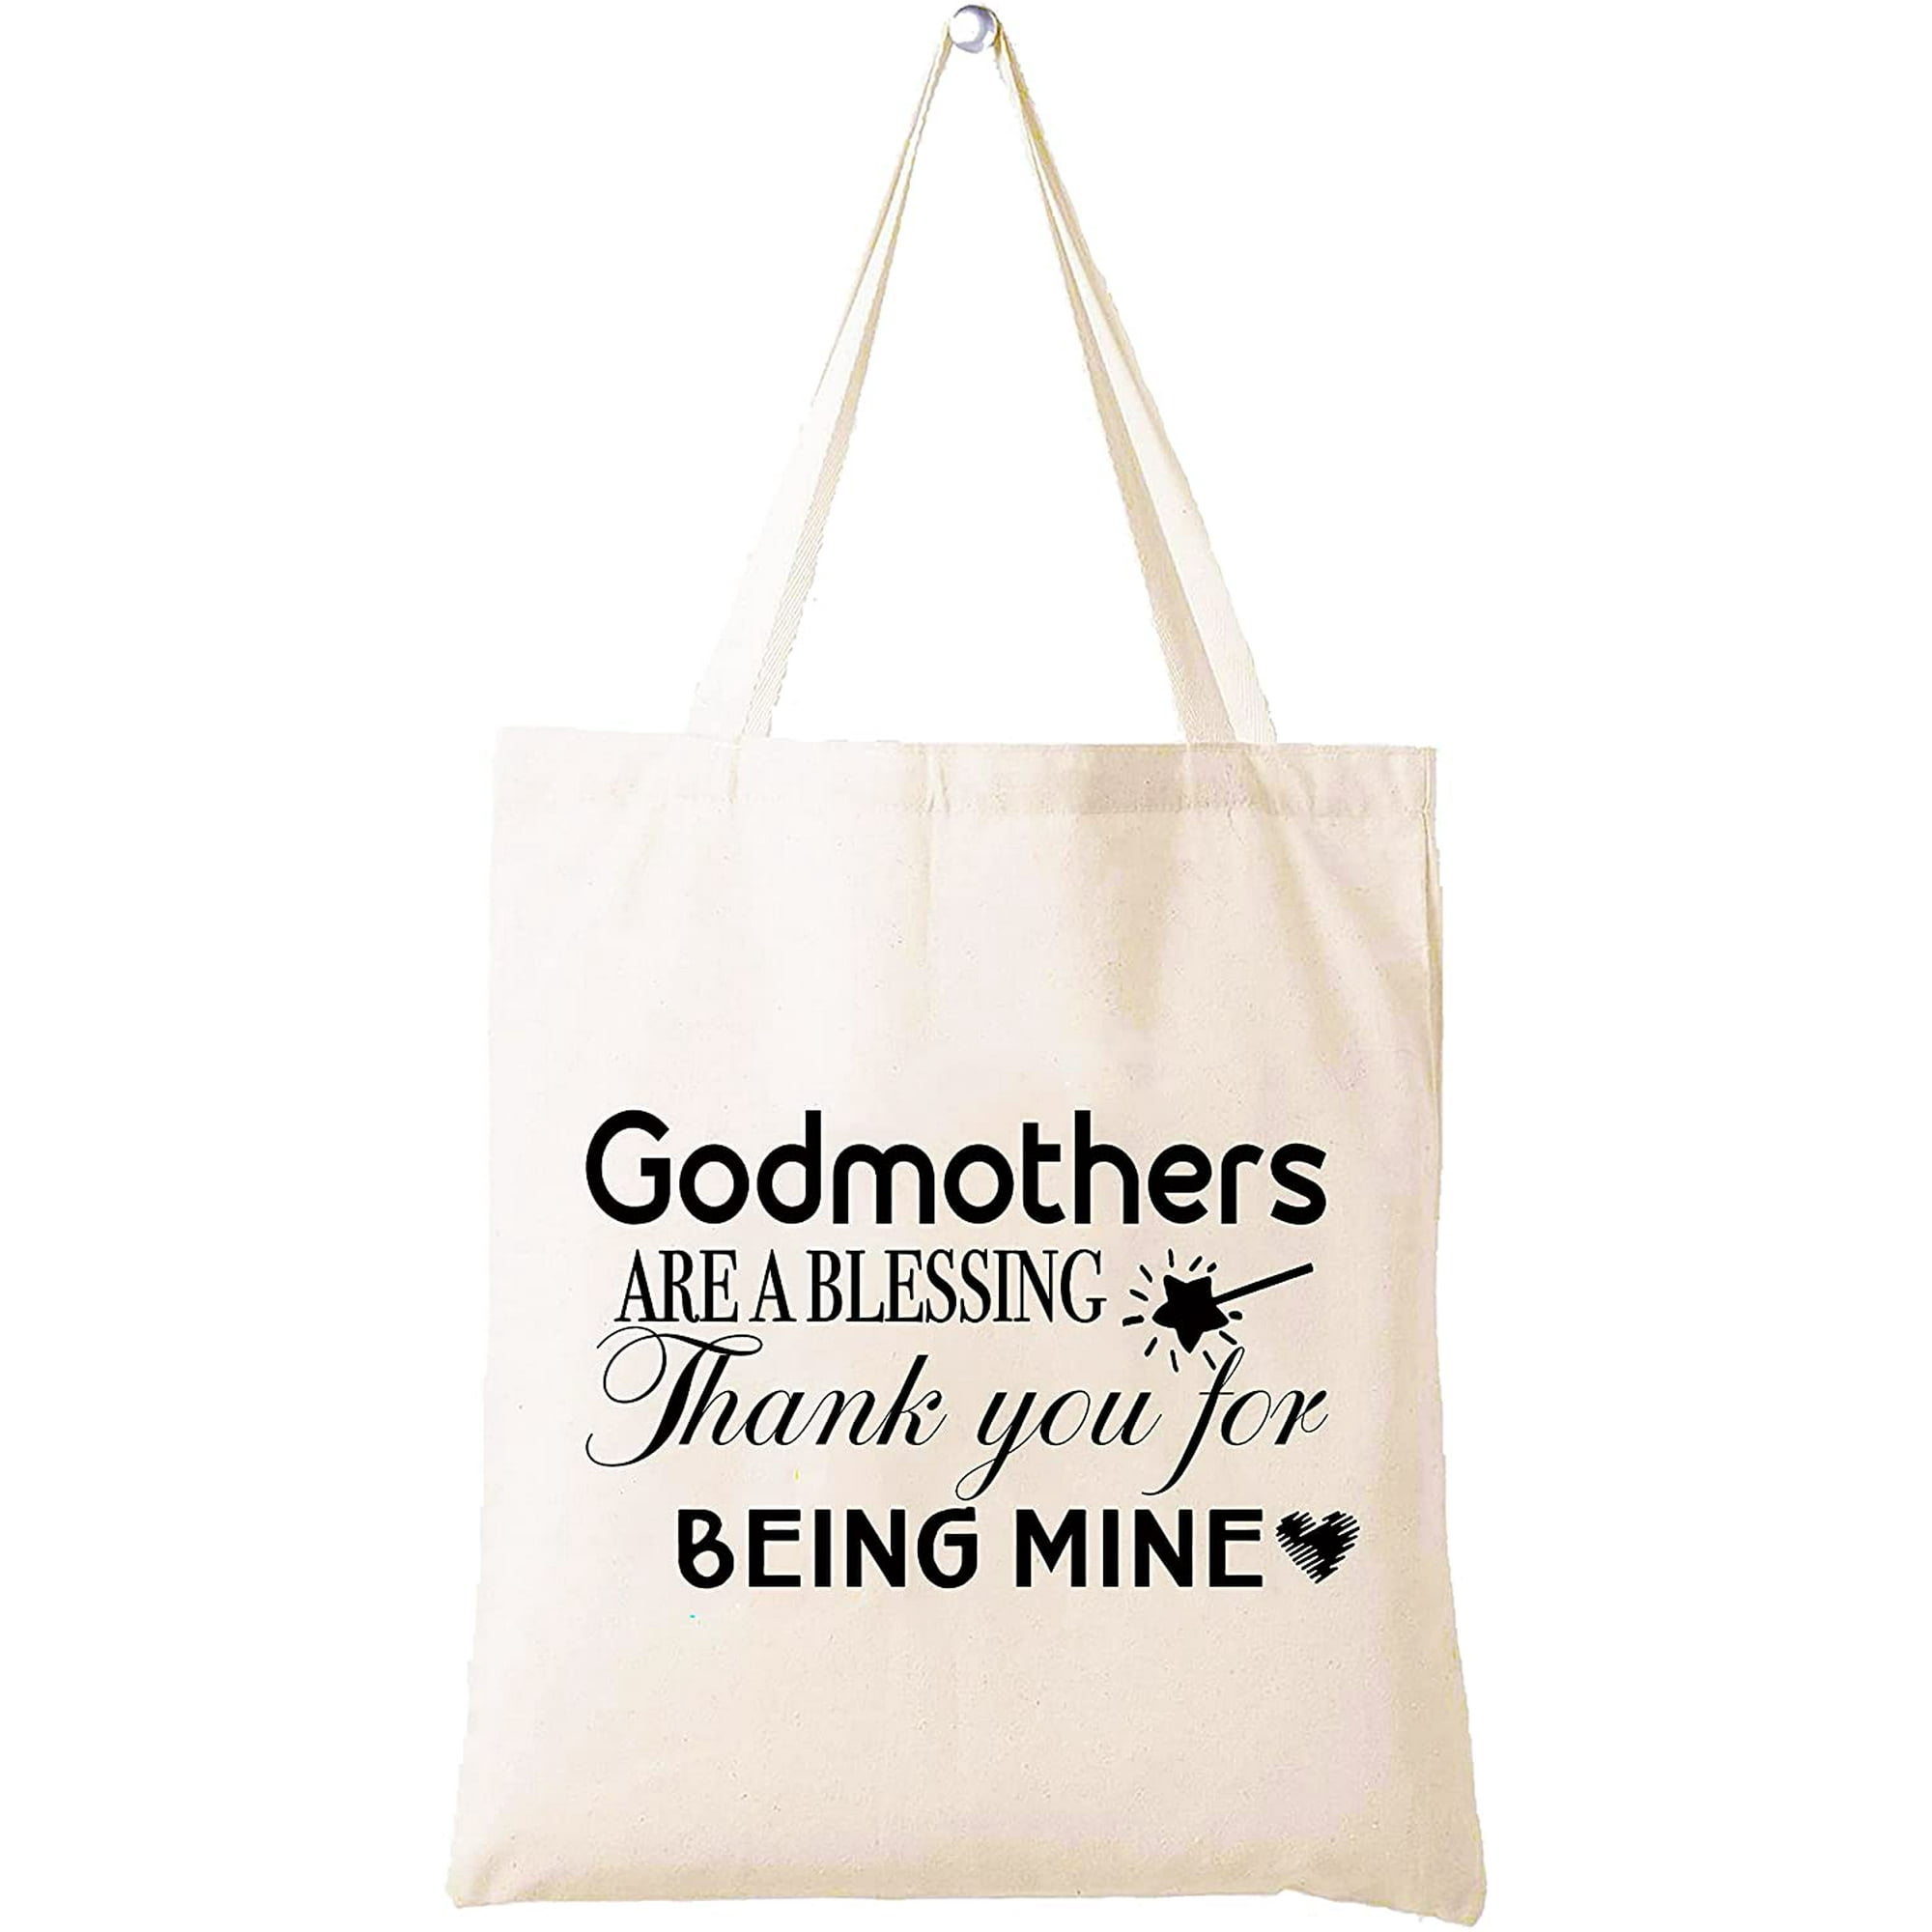 Godmother Gifts from Godchild Birthday Baptism Mothers Day Christmas gifts  for Godmother Shoulder Bag Shopping Bag Tote Bag Gift Godmothers Are A  Blessing Thank You for Being Mine | Walmart Canada